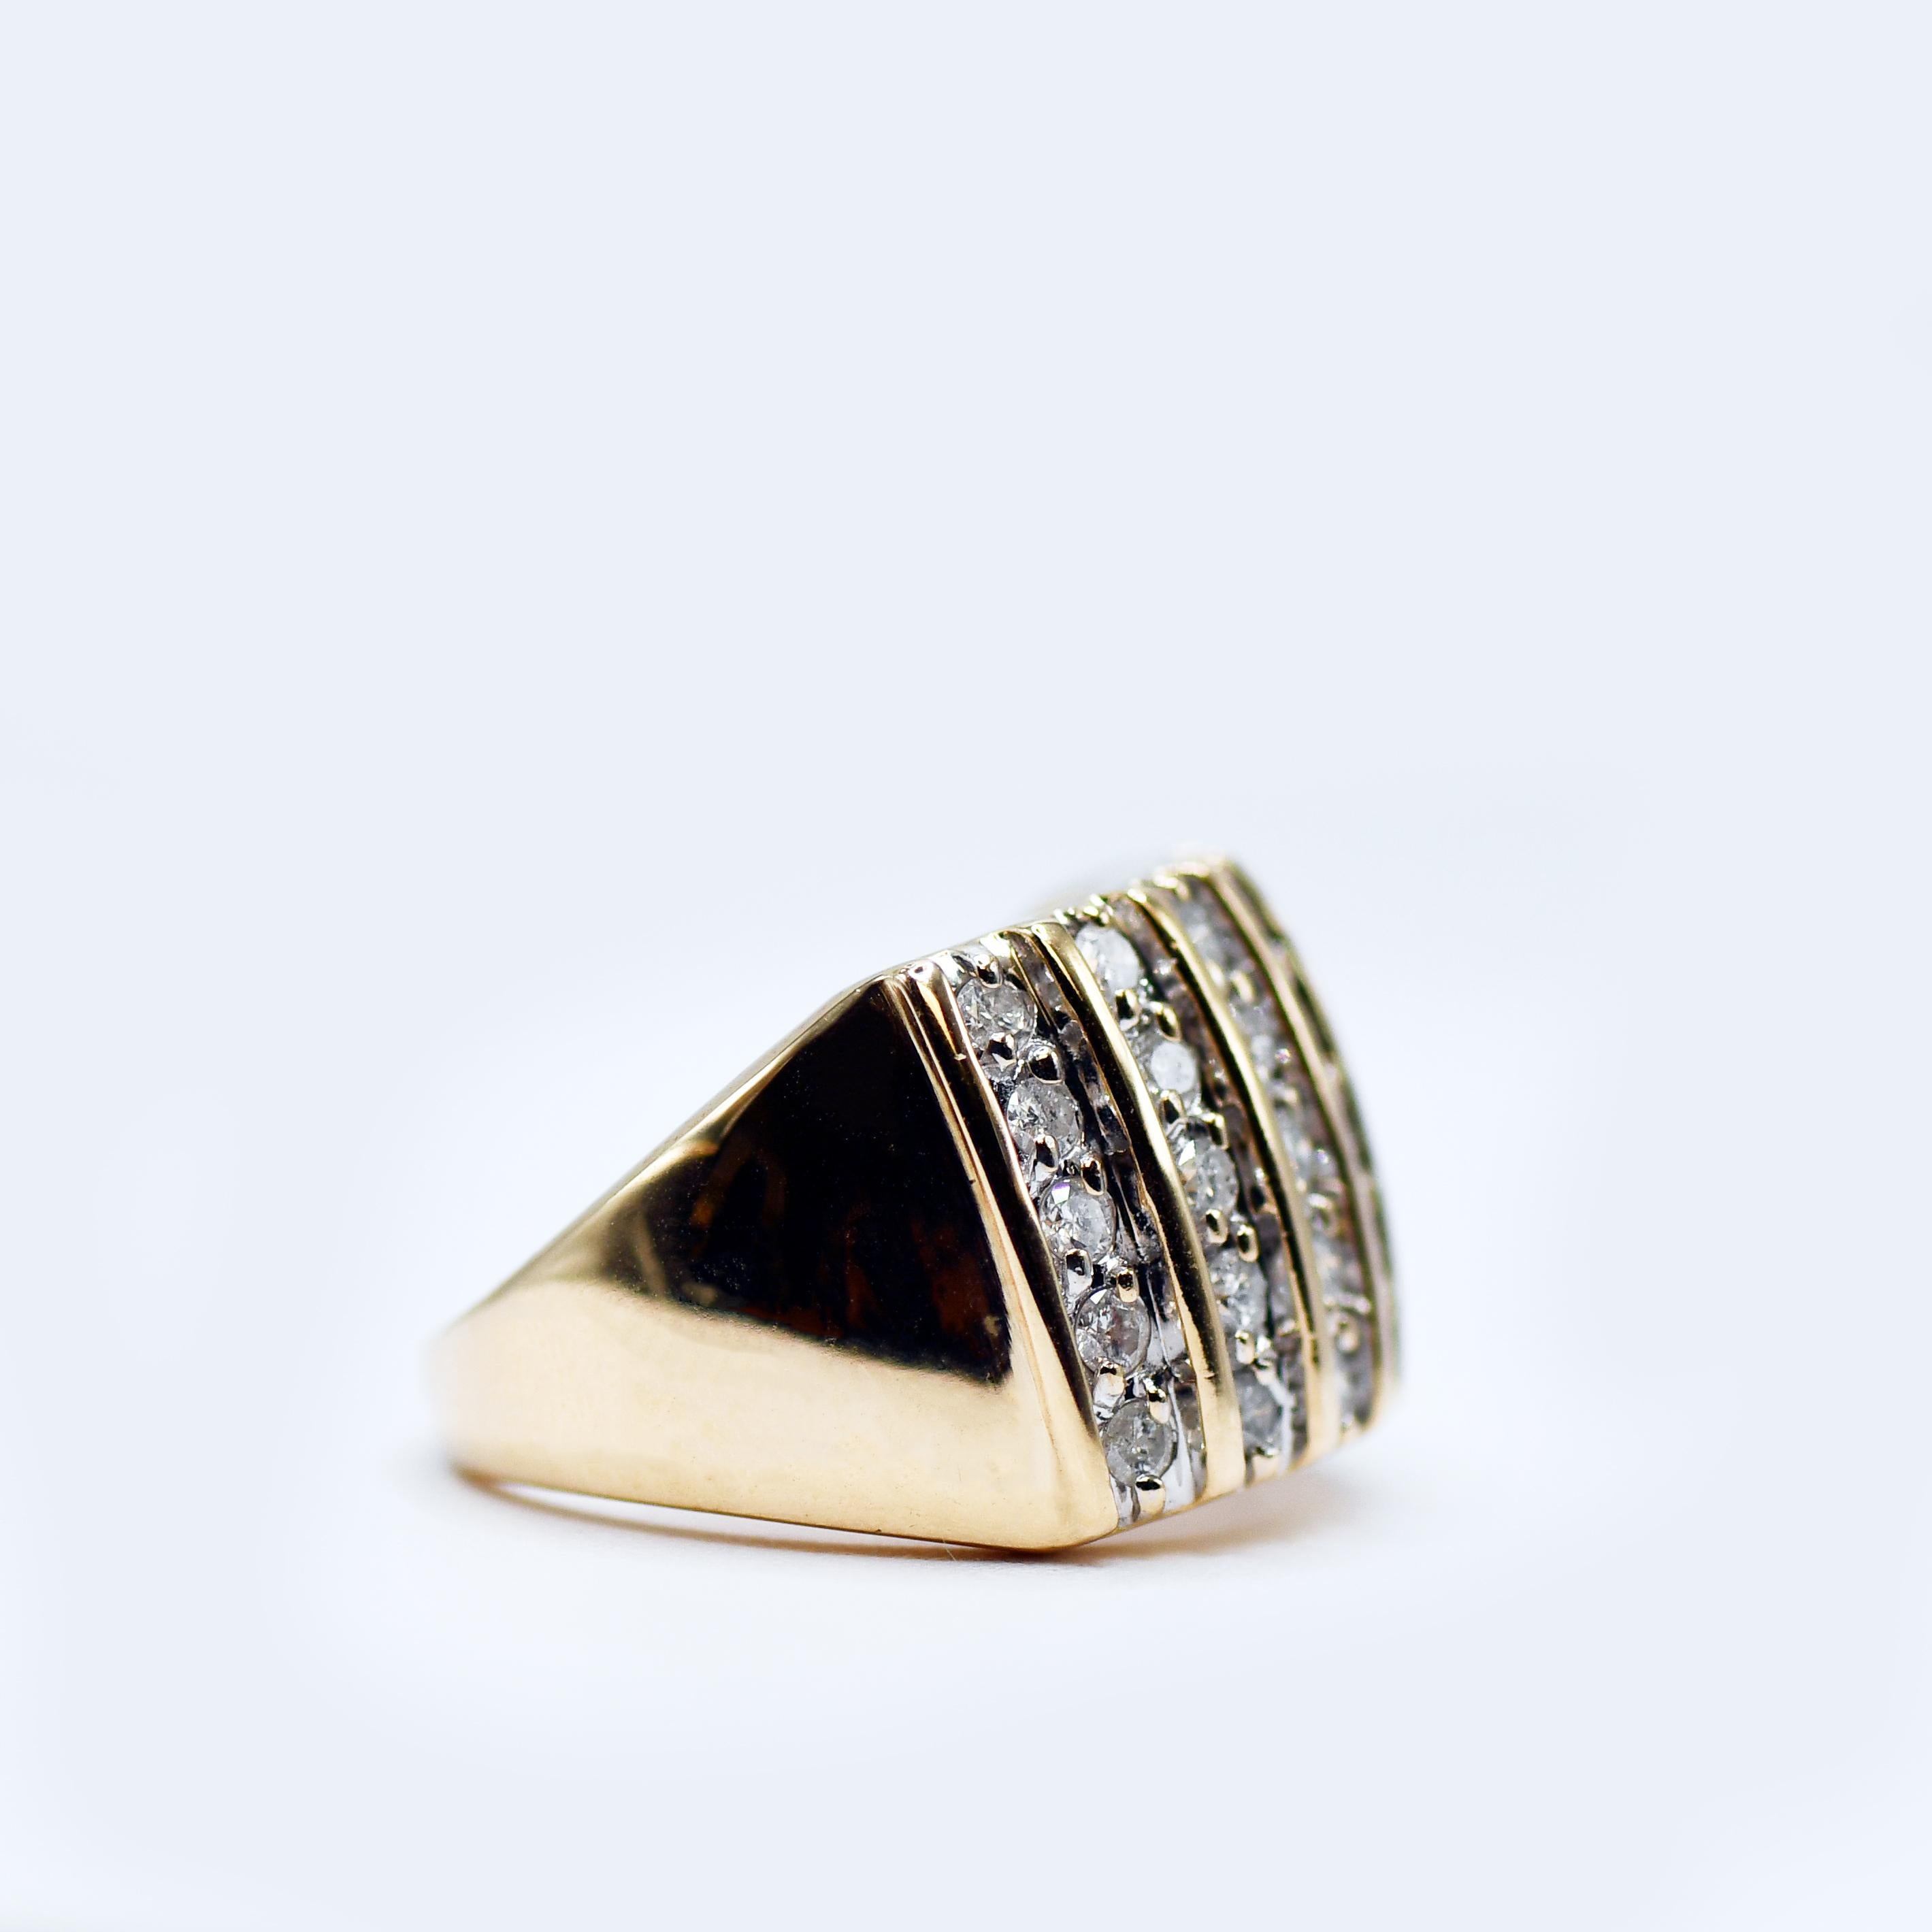 14K Yellow Gold Diamond Cocktail Ring, 1.00TDW, 8.6g In Excellent Condition For Sale In Laguna Beach, CA